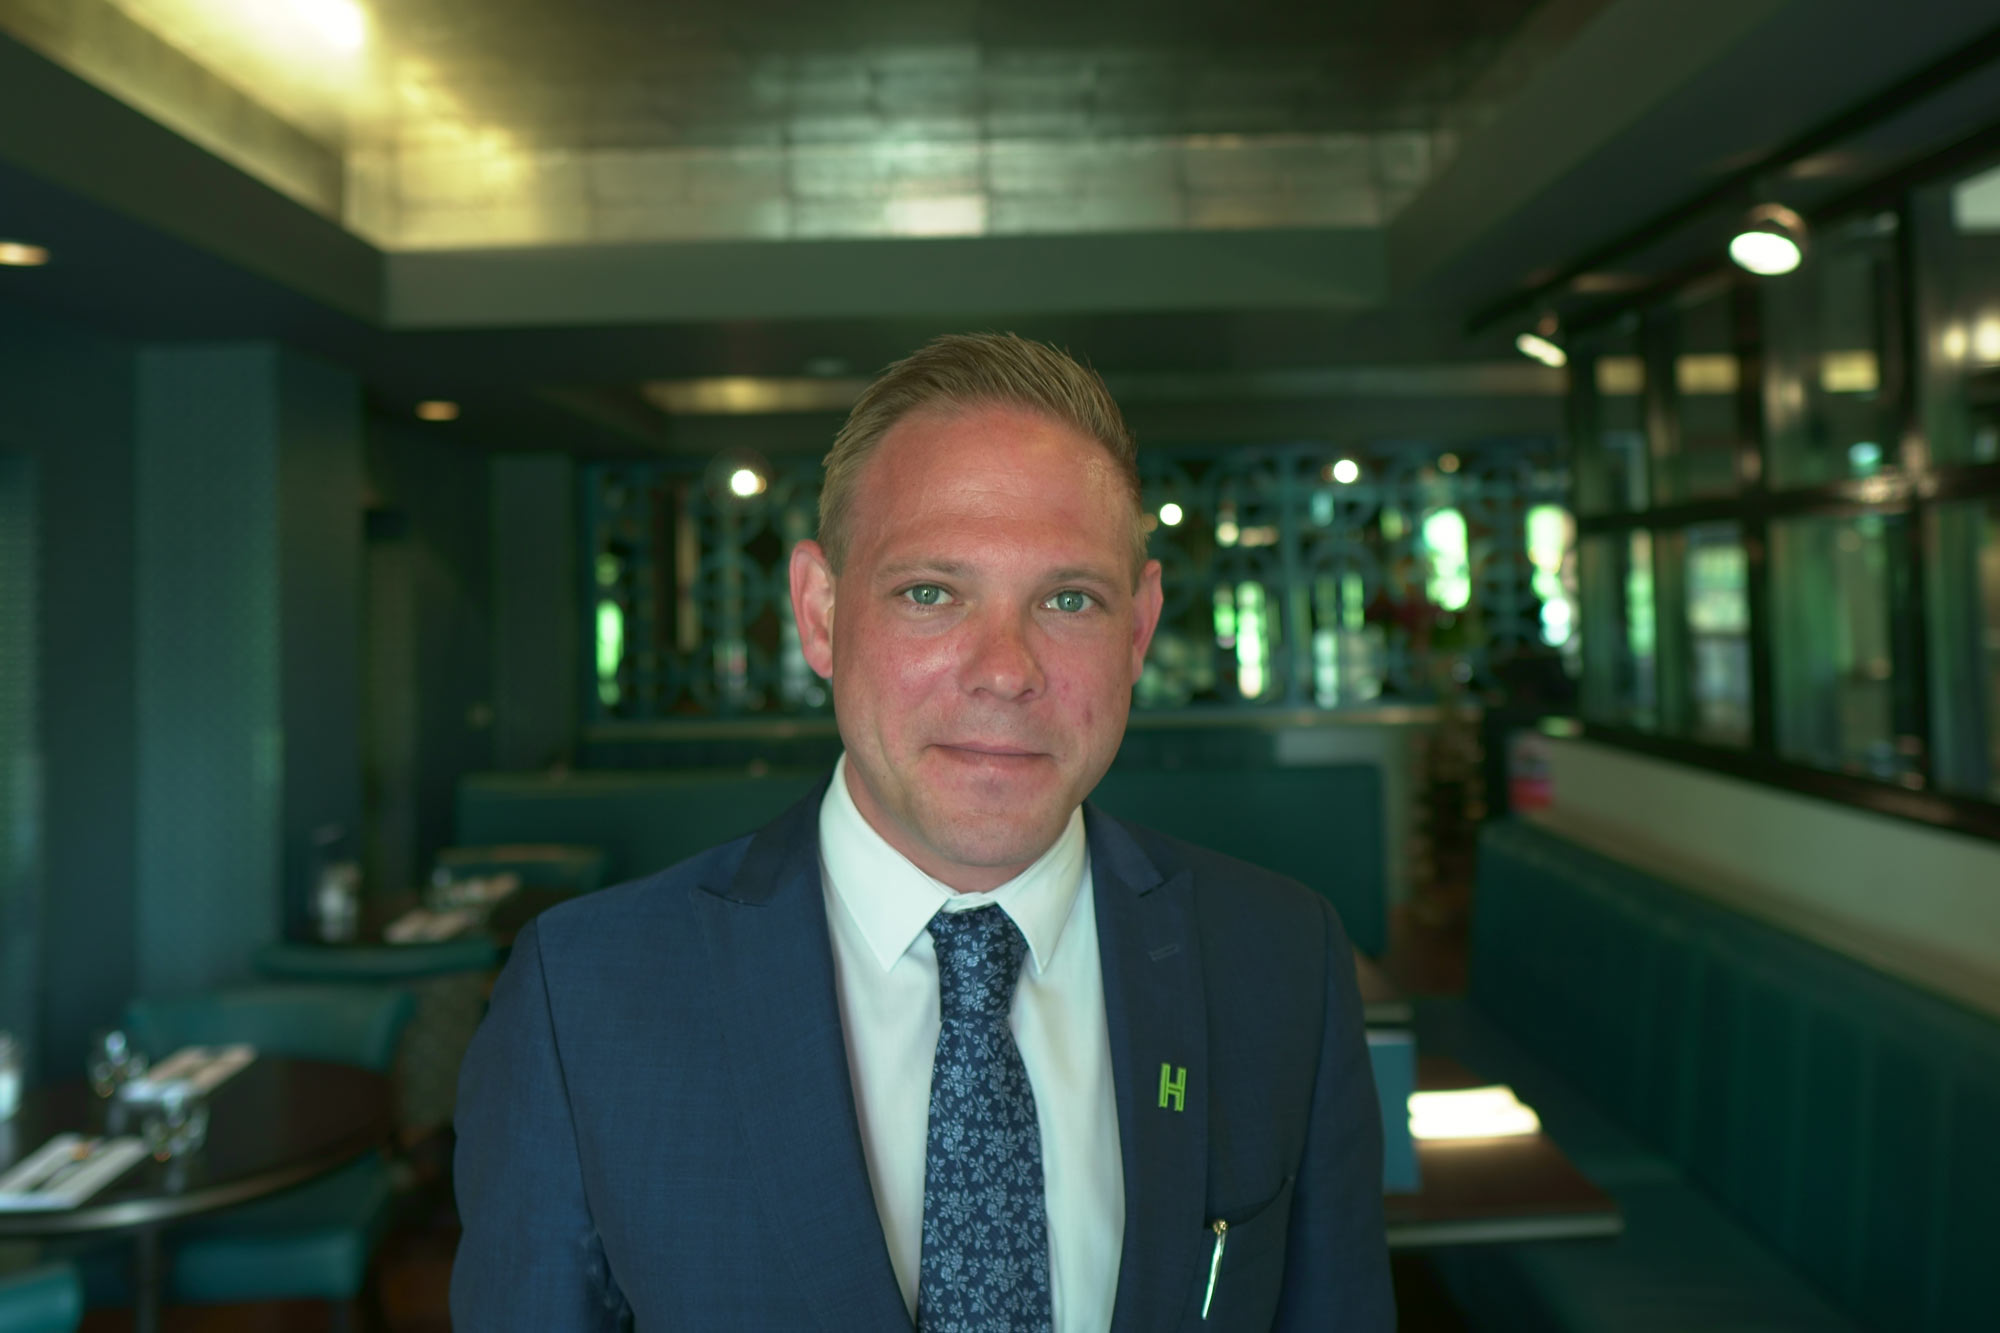 Nathan George, general manager at the West Park Hotel